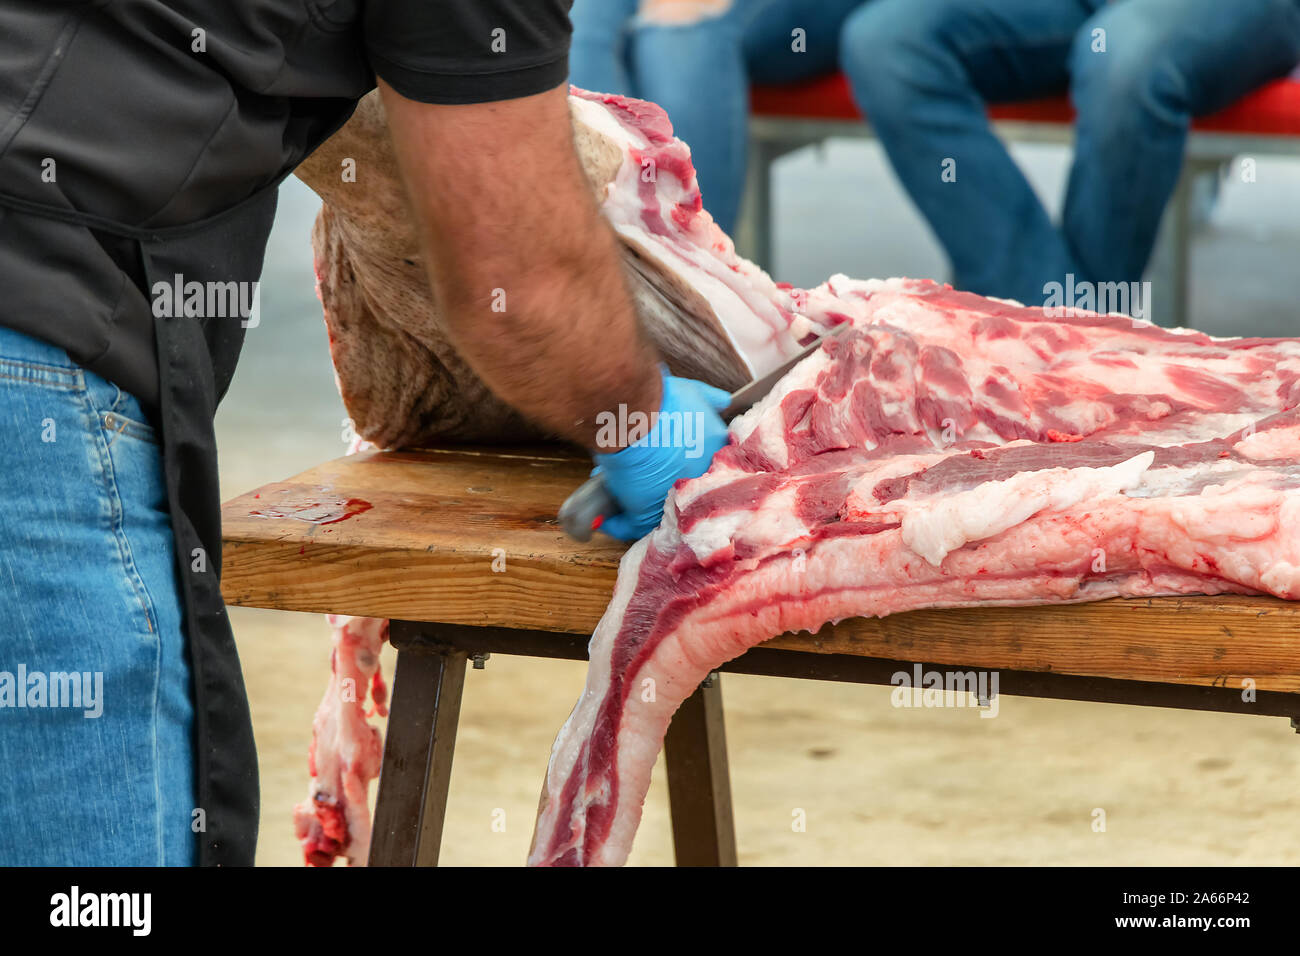 Slaughtering process and traditional production of iberian pig and extract different the parts of Iberian pig in 2019 iberian ham fair of Aracena Stock Photo